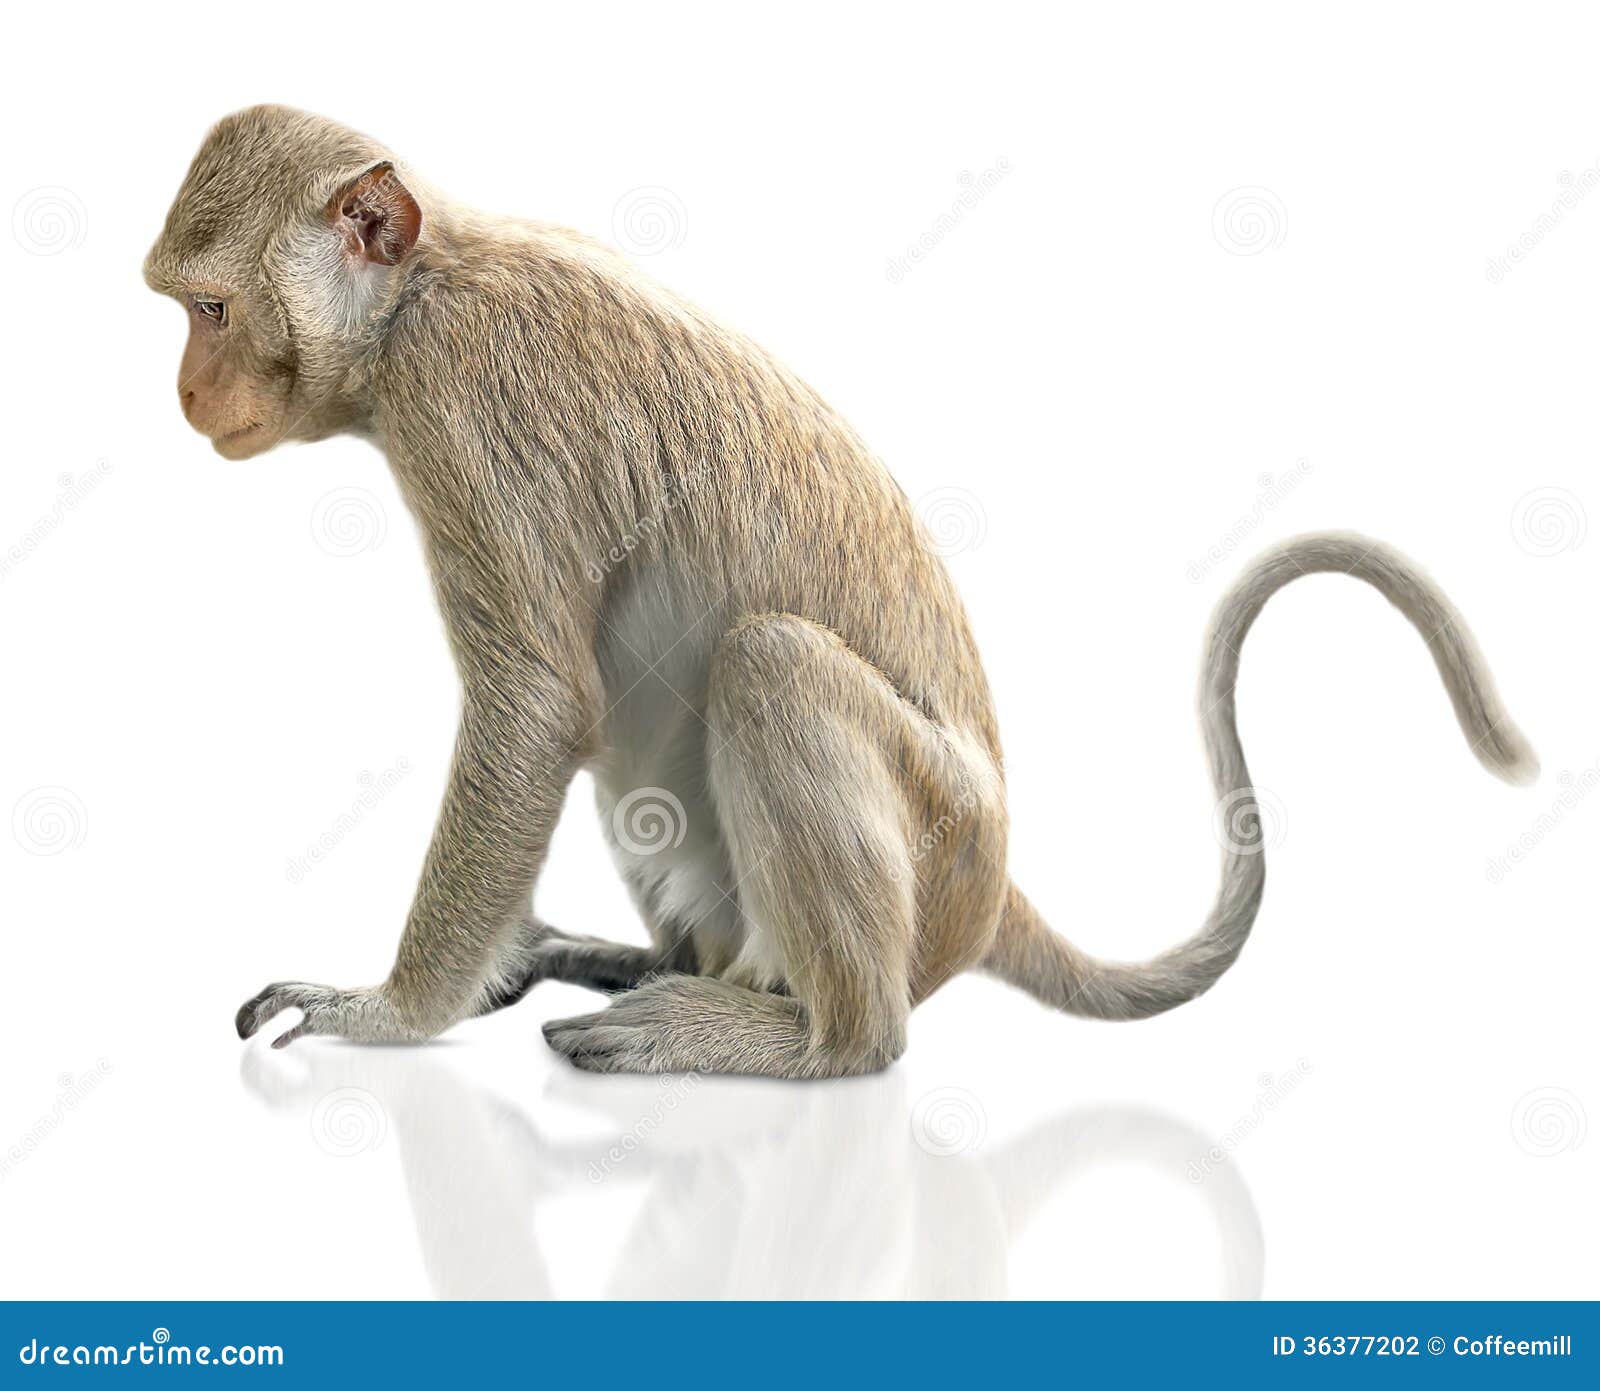 Monkey stock photo. Image of small, nature, wild, brown - 36377202